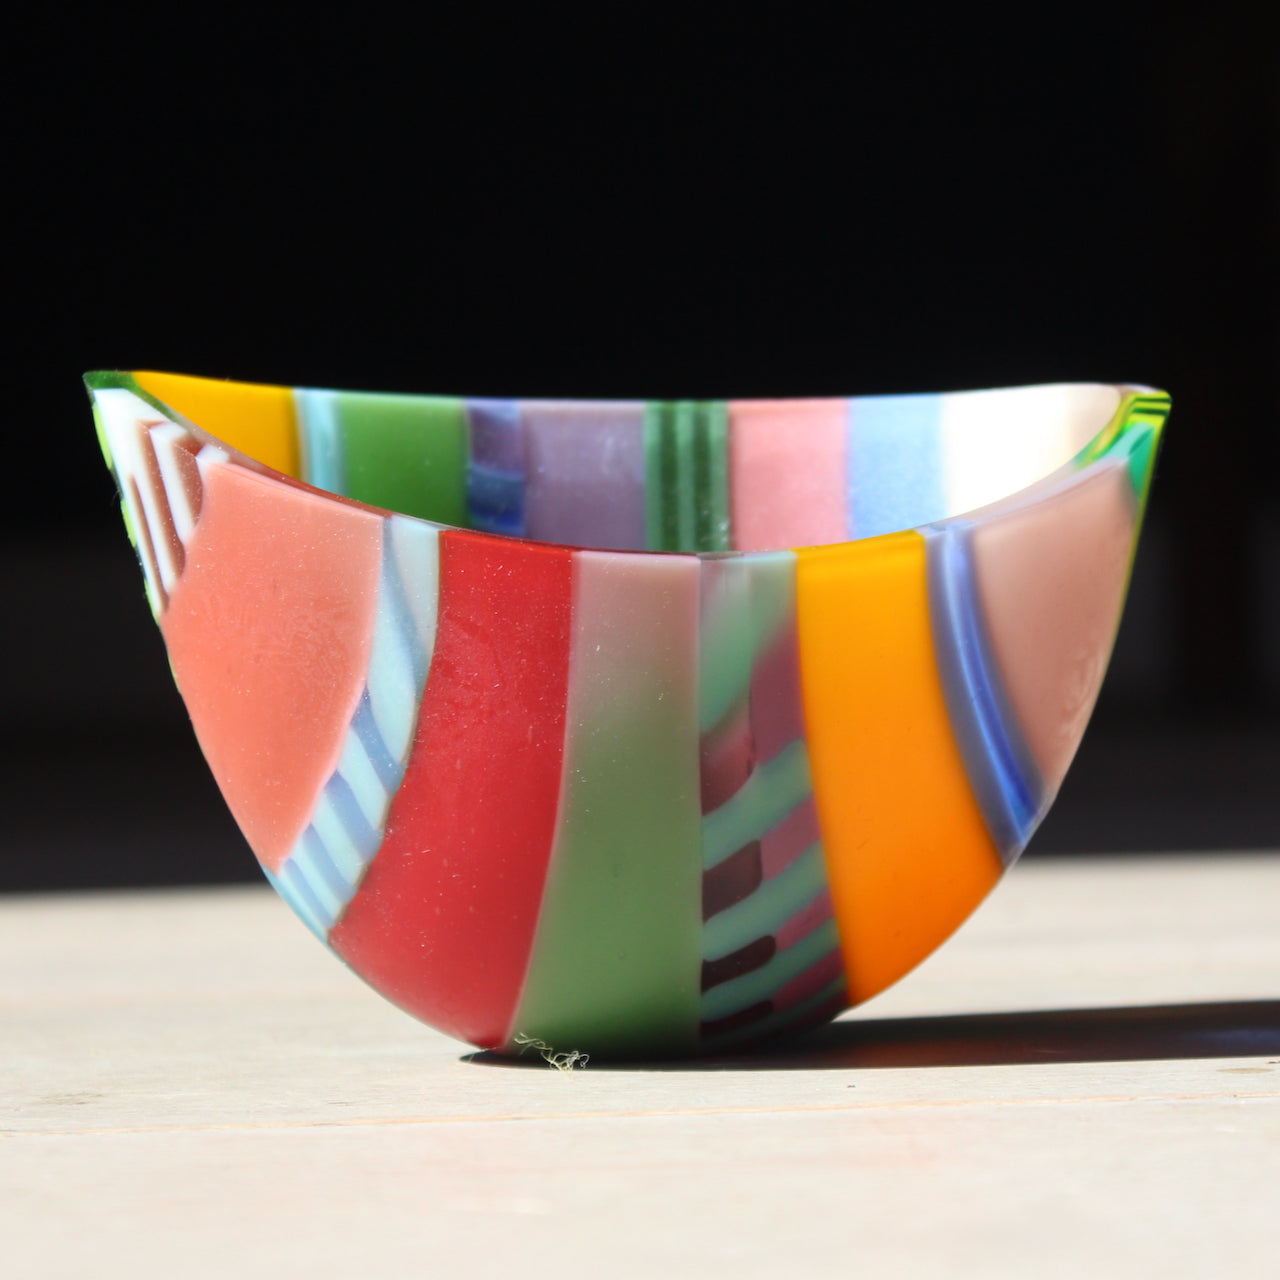 Beautiful vibrant glass bowl by artist Ruth Shelley in tones of pink, green, yellow, blue, red.